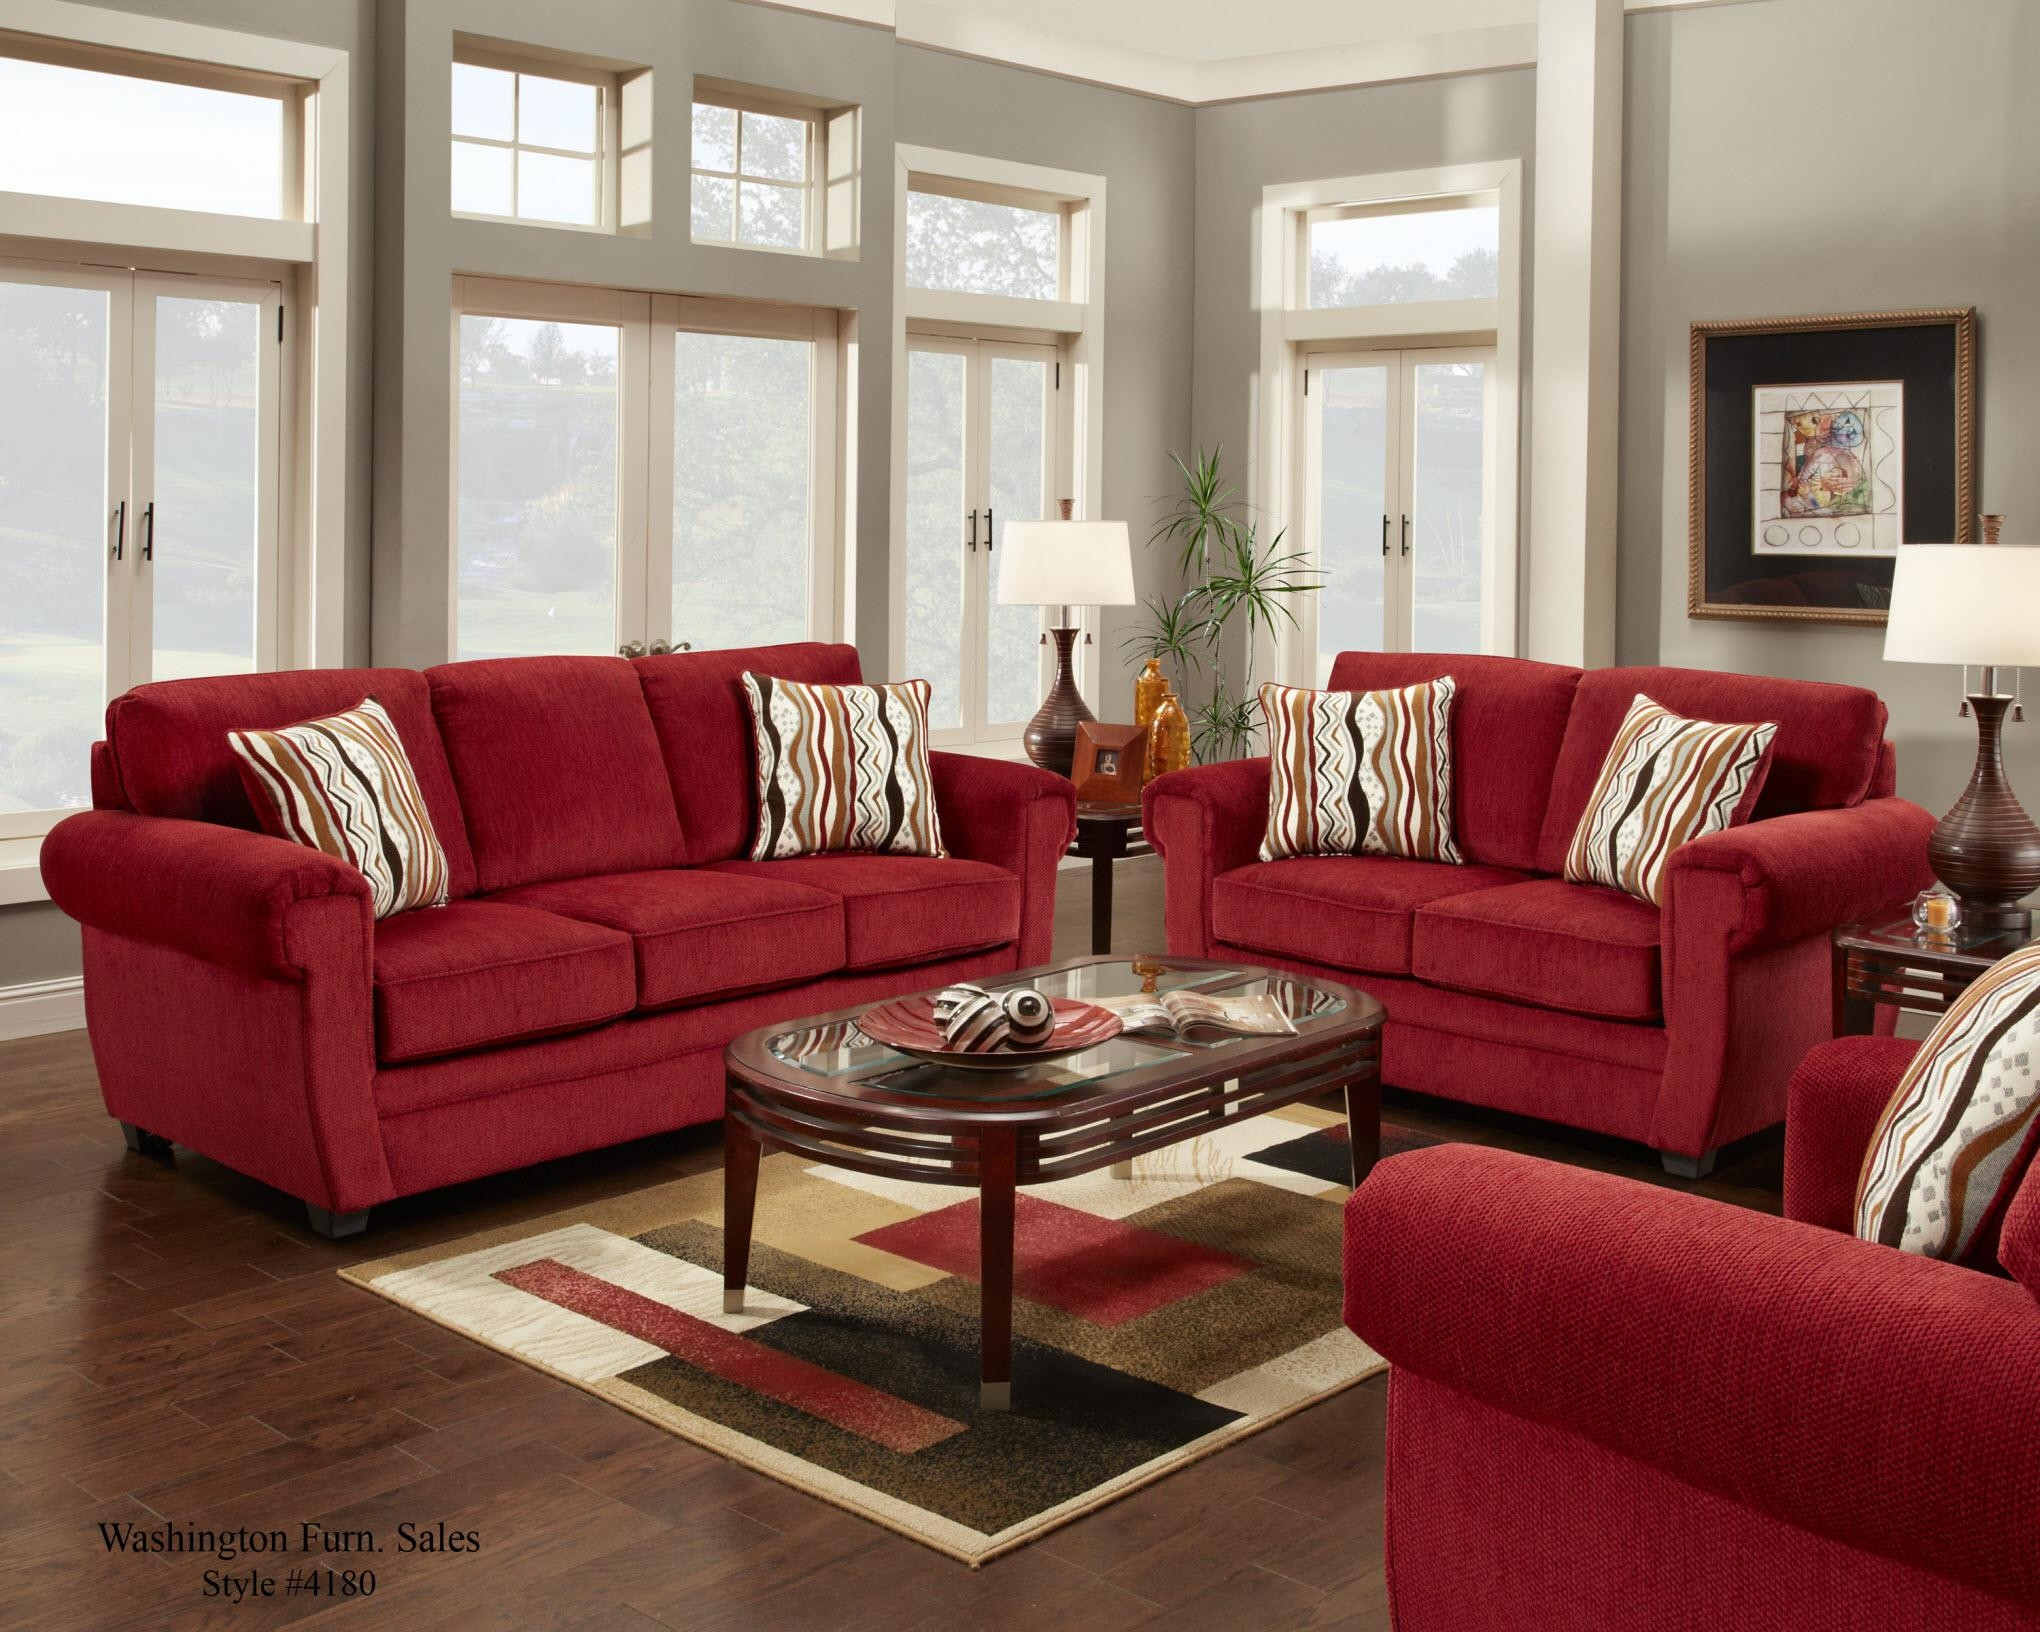 Red Couch Living Room Ideas
 20 Top Black and Red Sofa Sets